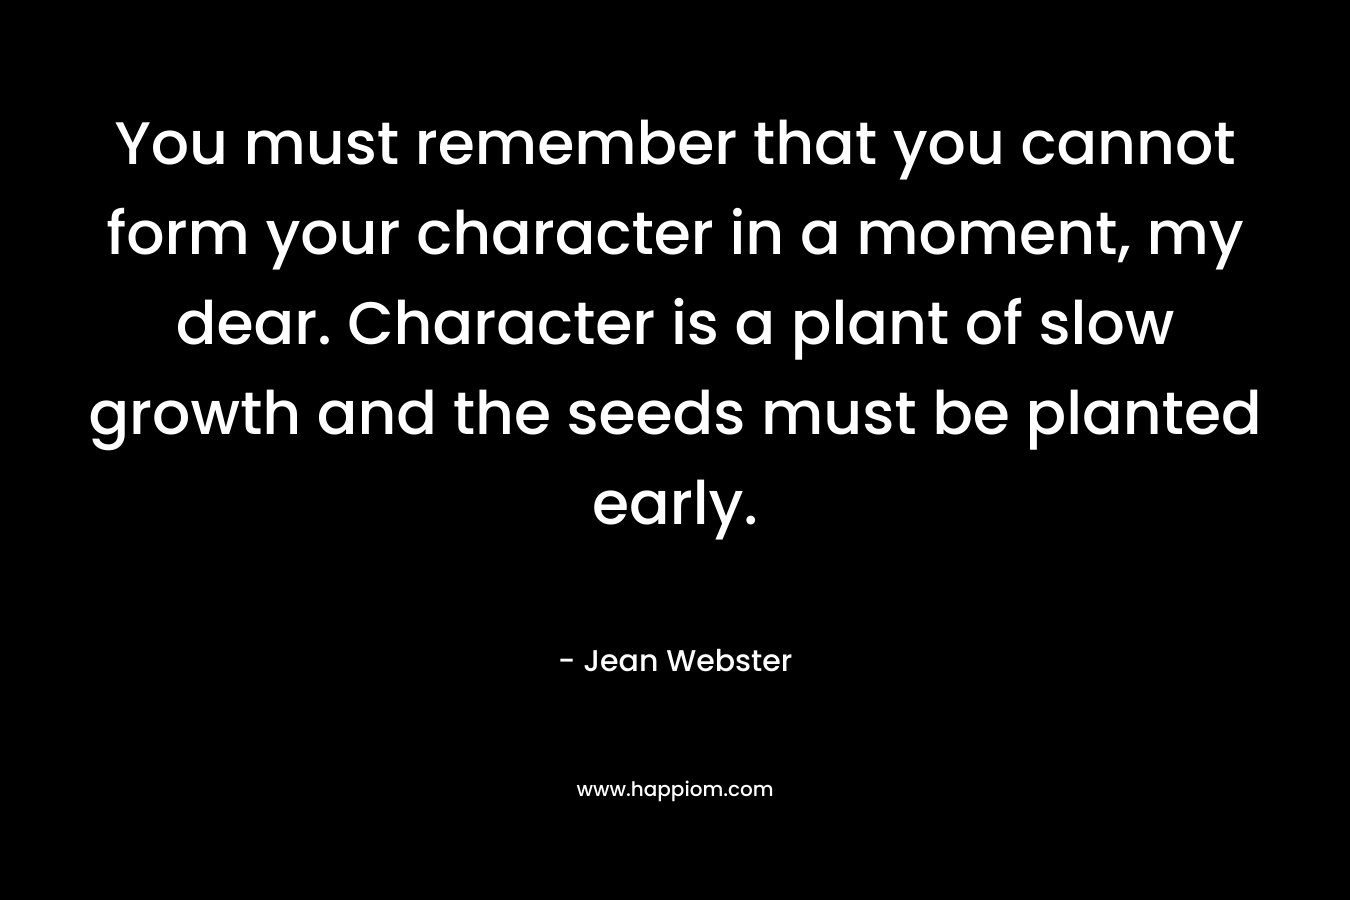 You must remember that you cannot form your character in a moment, my dear. Character is a plant of slow growth and the seeds must be planted early. – Jean Webster